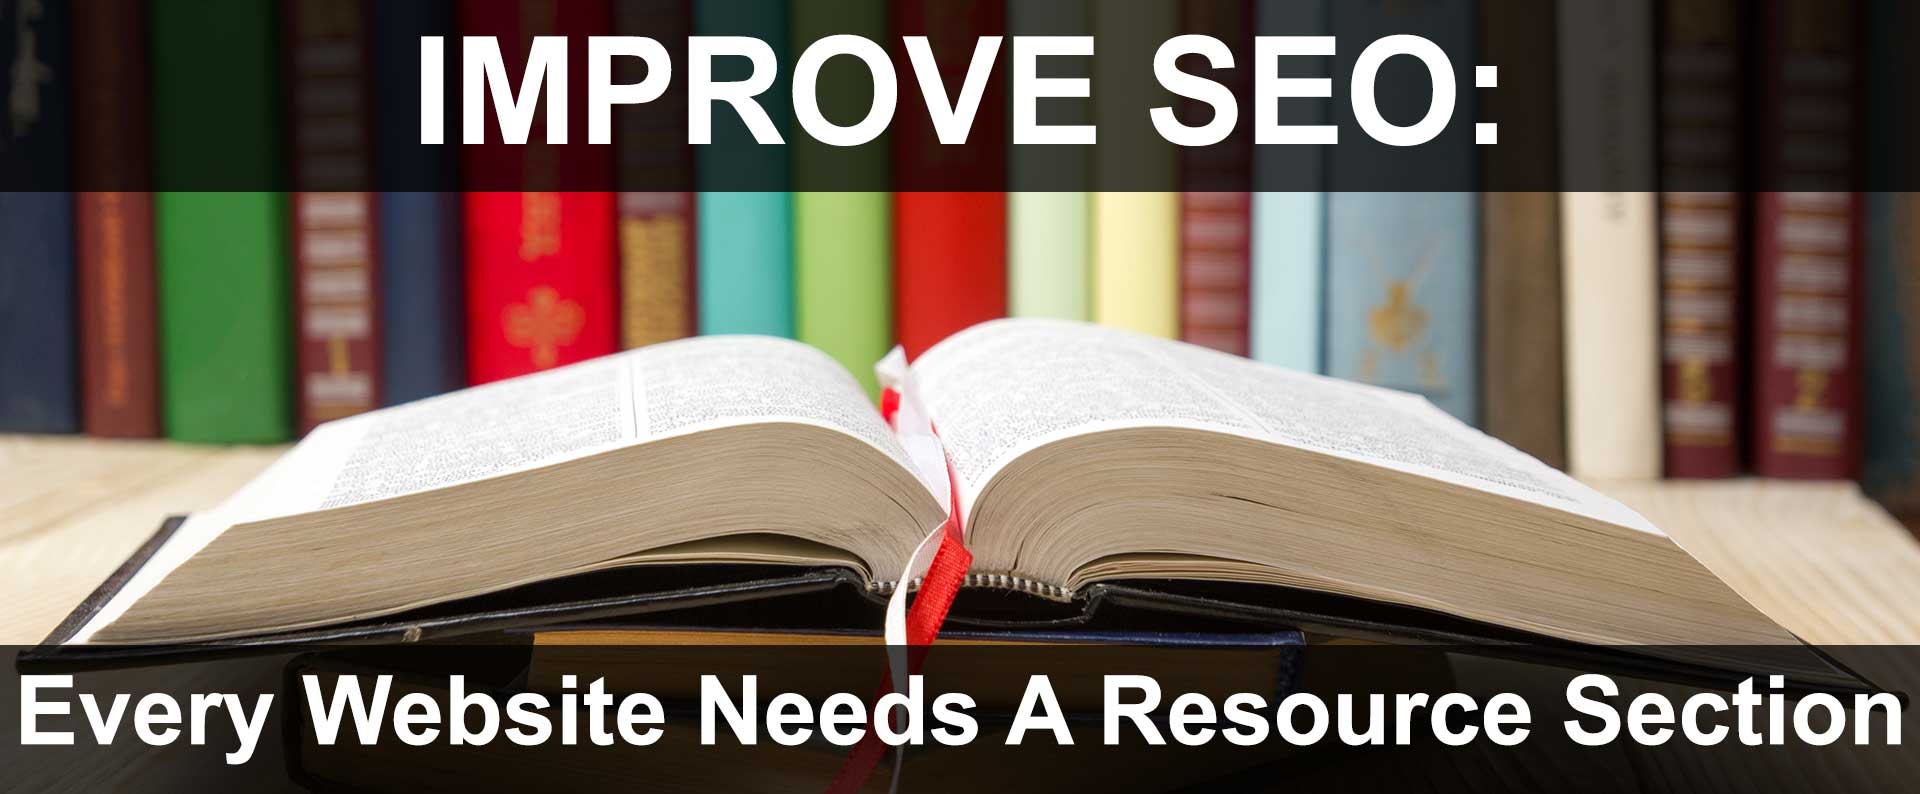 The Benefits of Providing Online Resources For Customers & SEO